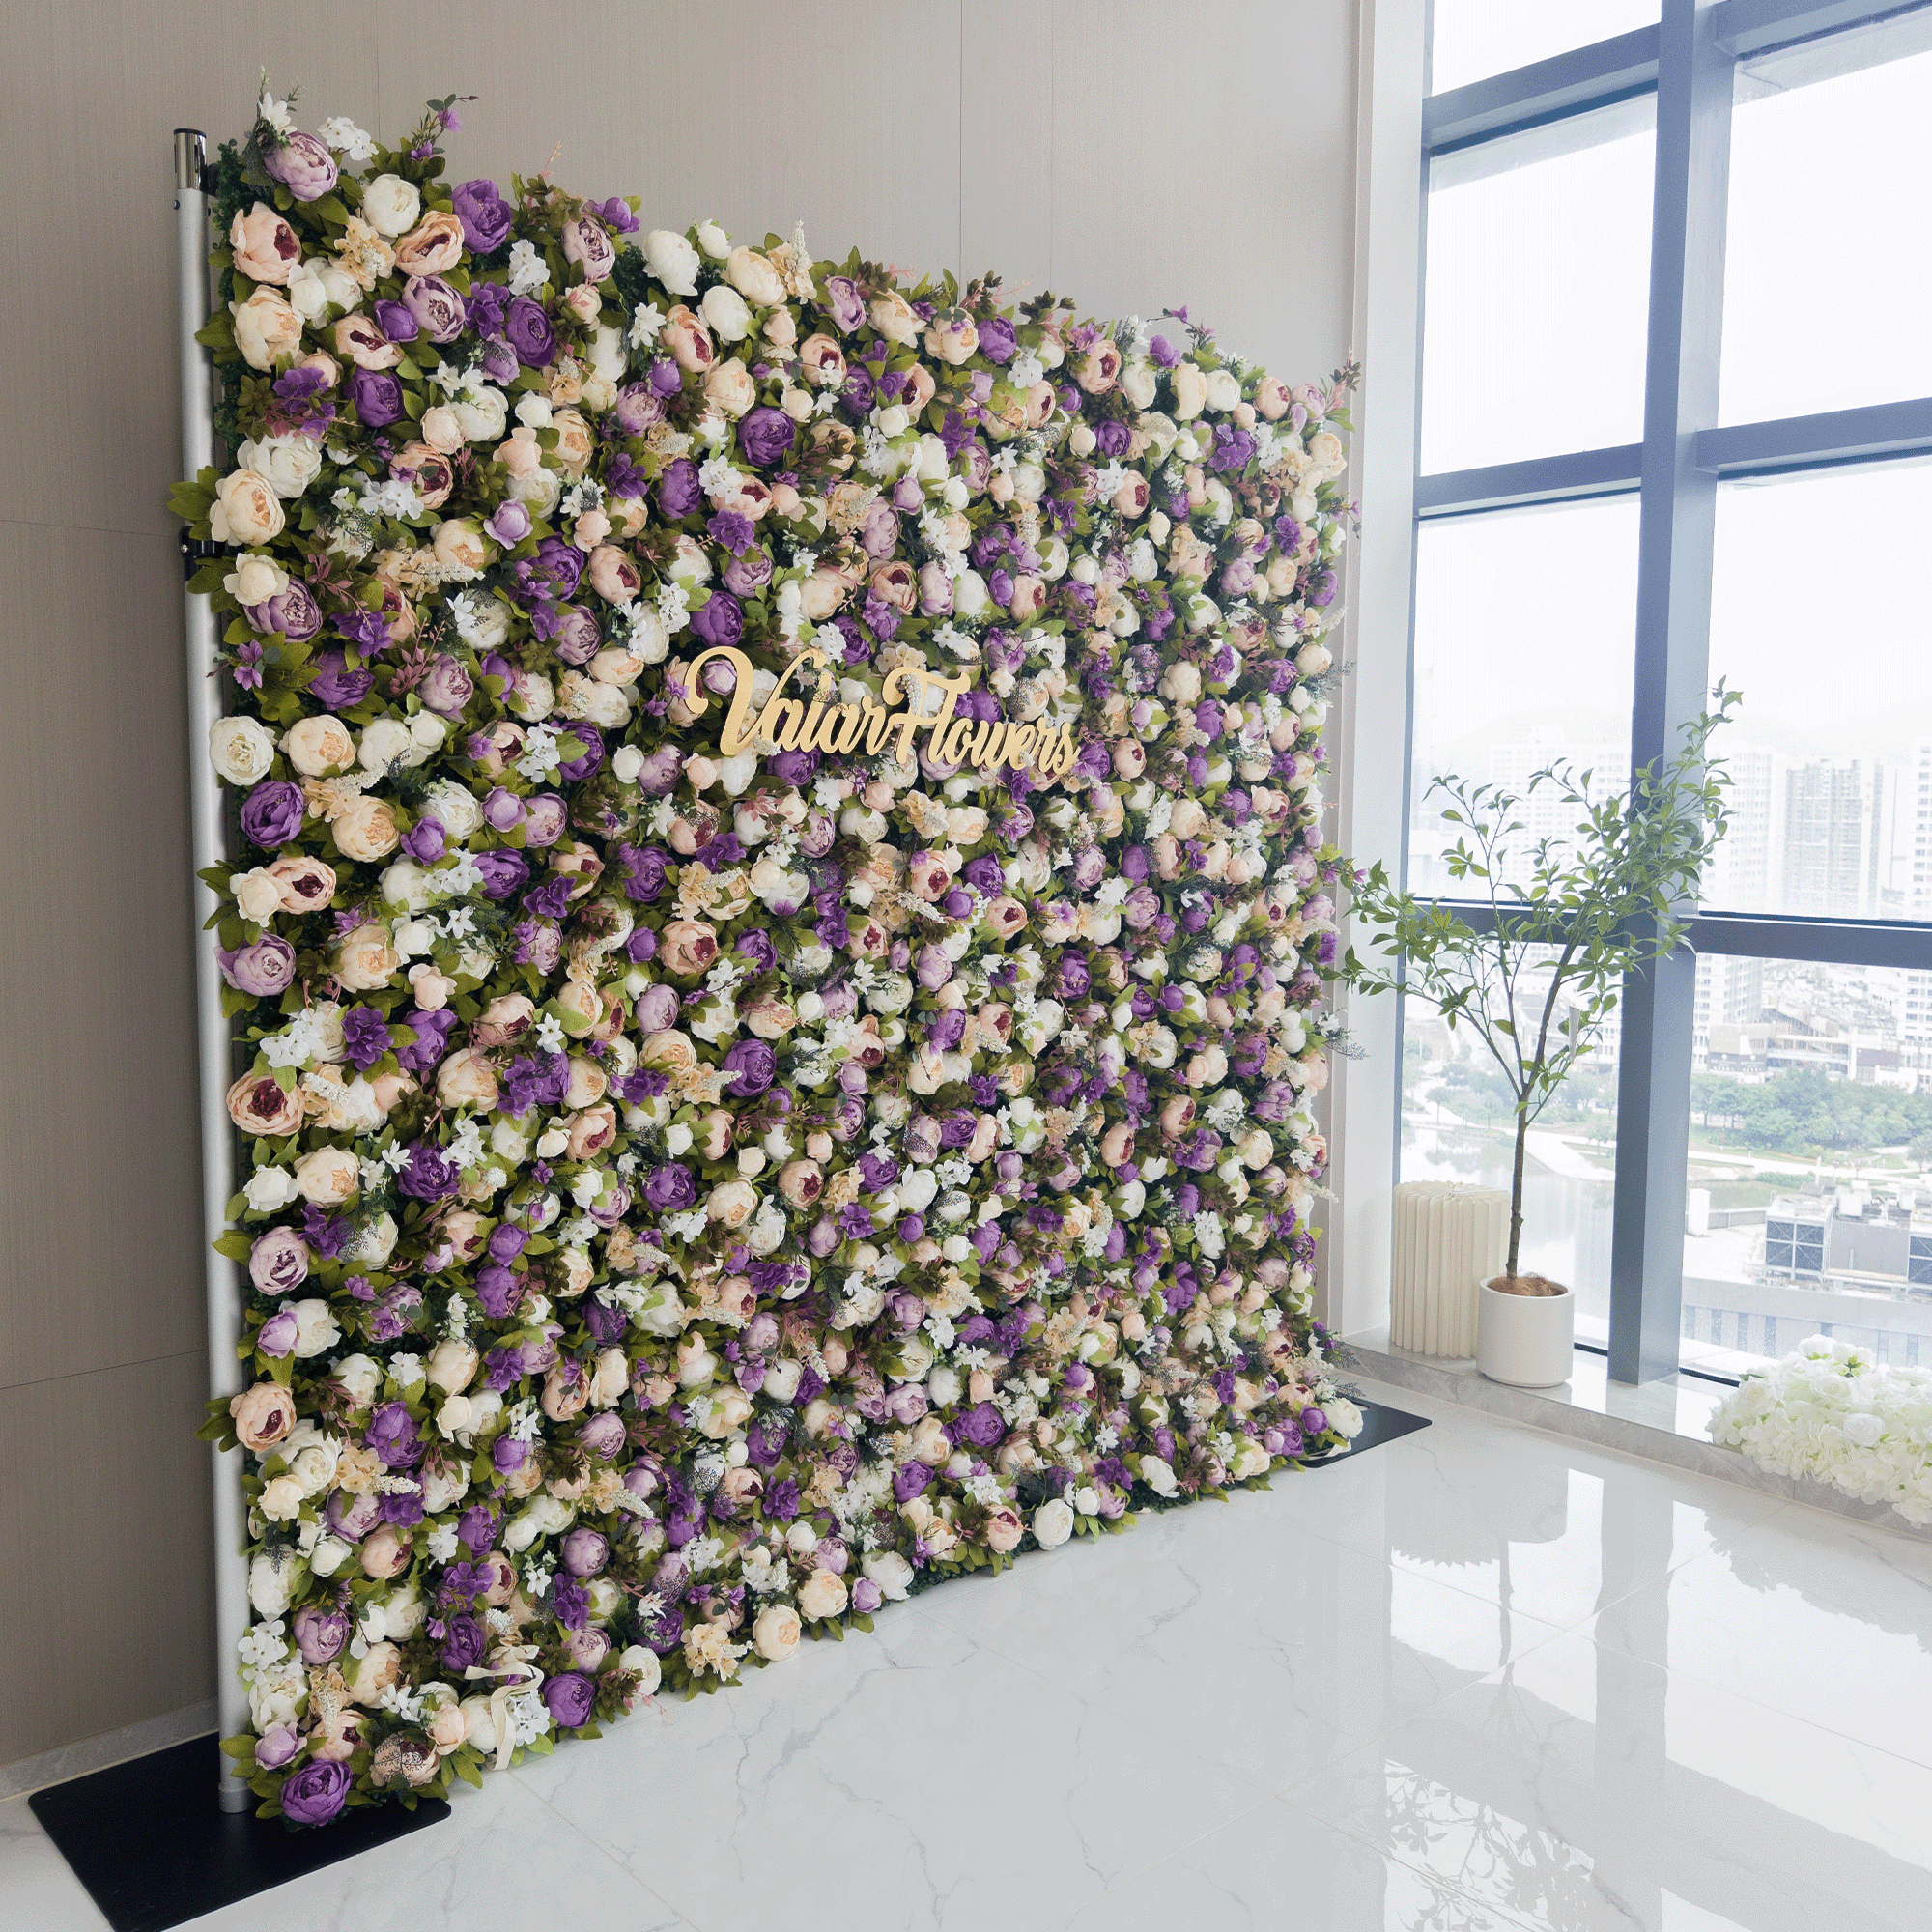 Valar Flower Roll Up Fabric Artificial Flower Wall Wedding Backdrop, Floral Party Decor, Event Photography-VF-307